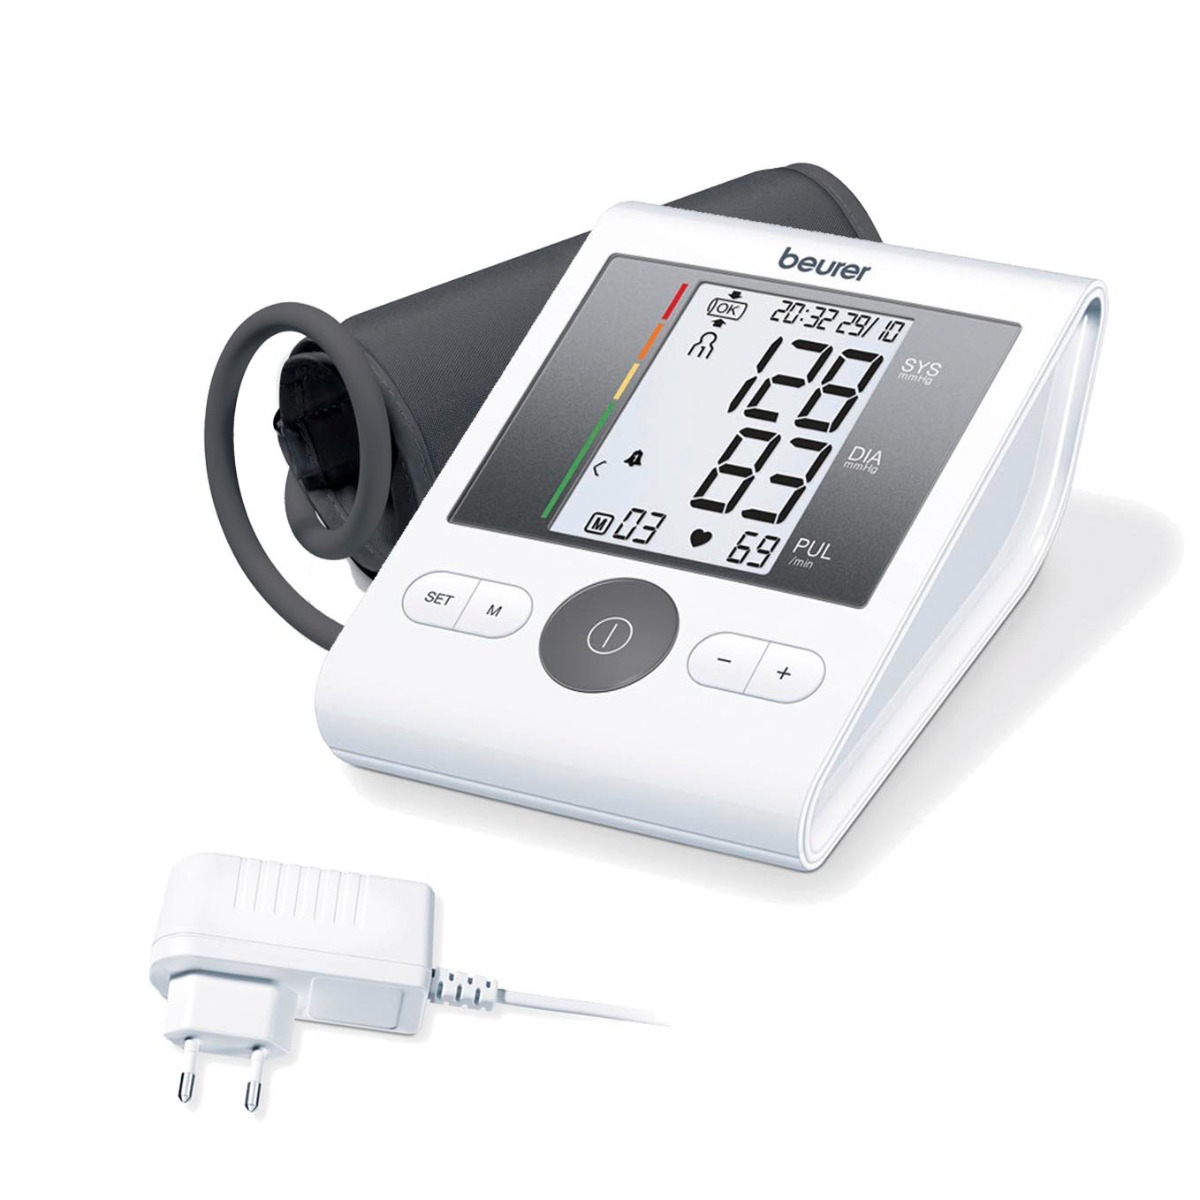 Beurer BM 28 upper arm blood pressure monitor WITH ADAPTER